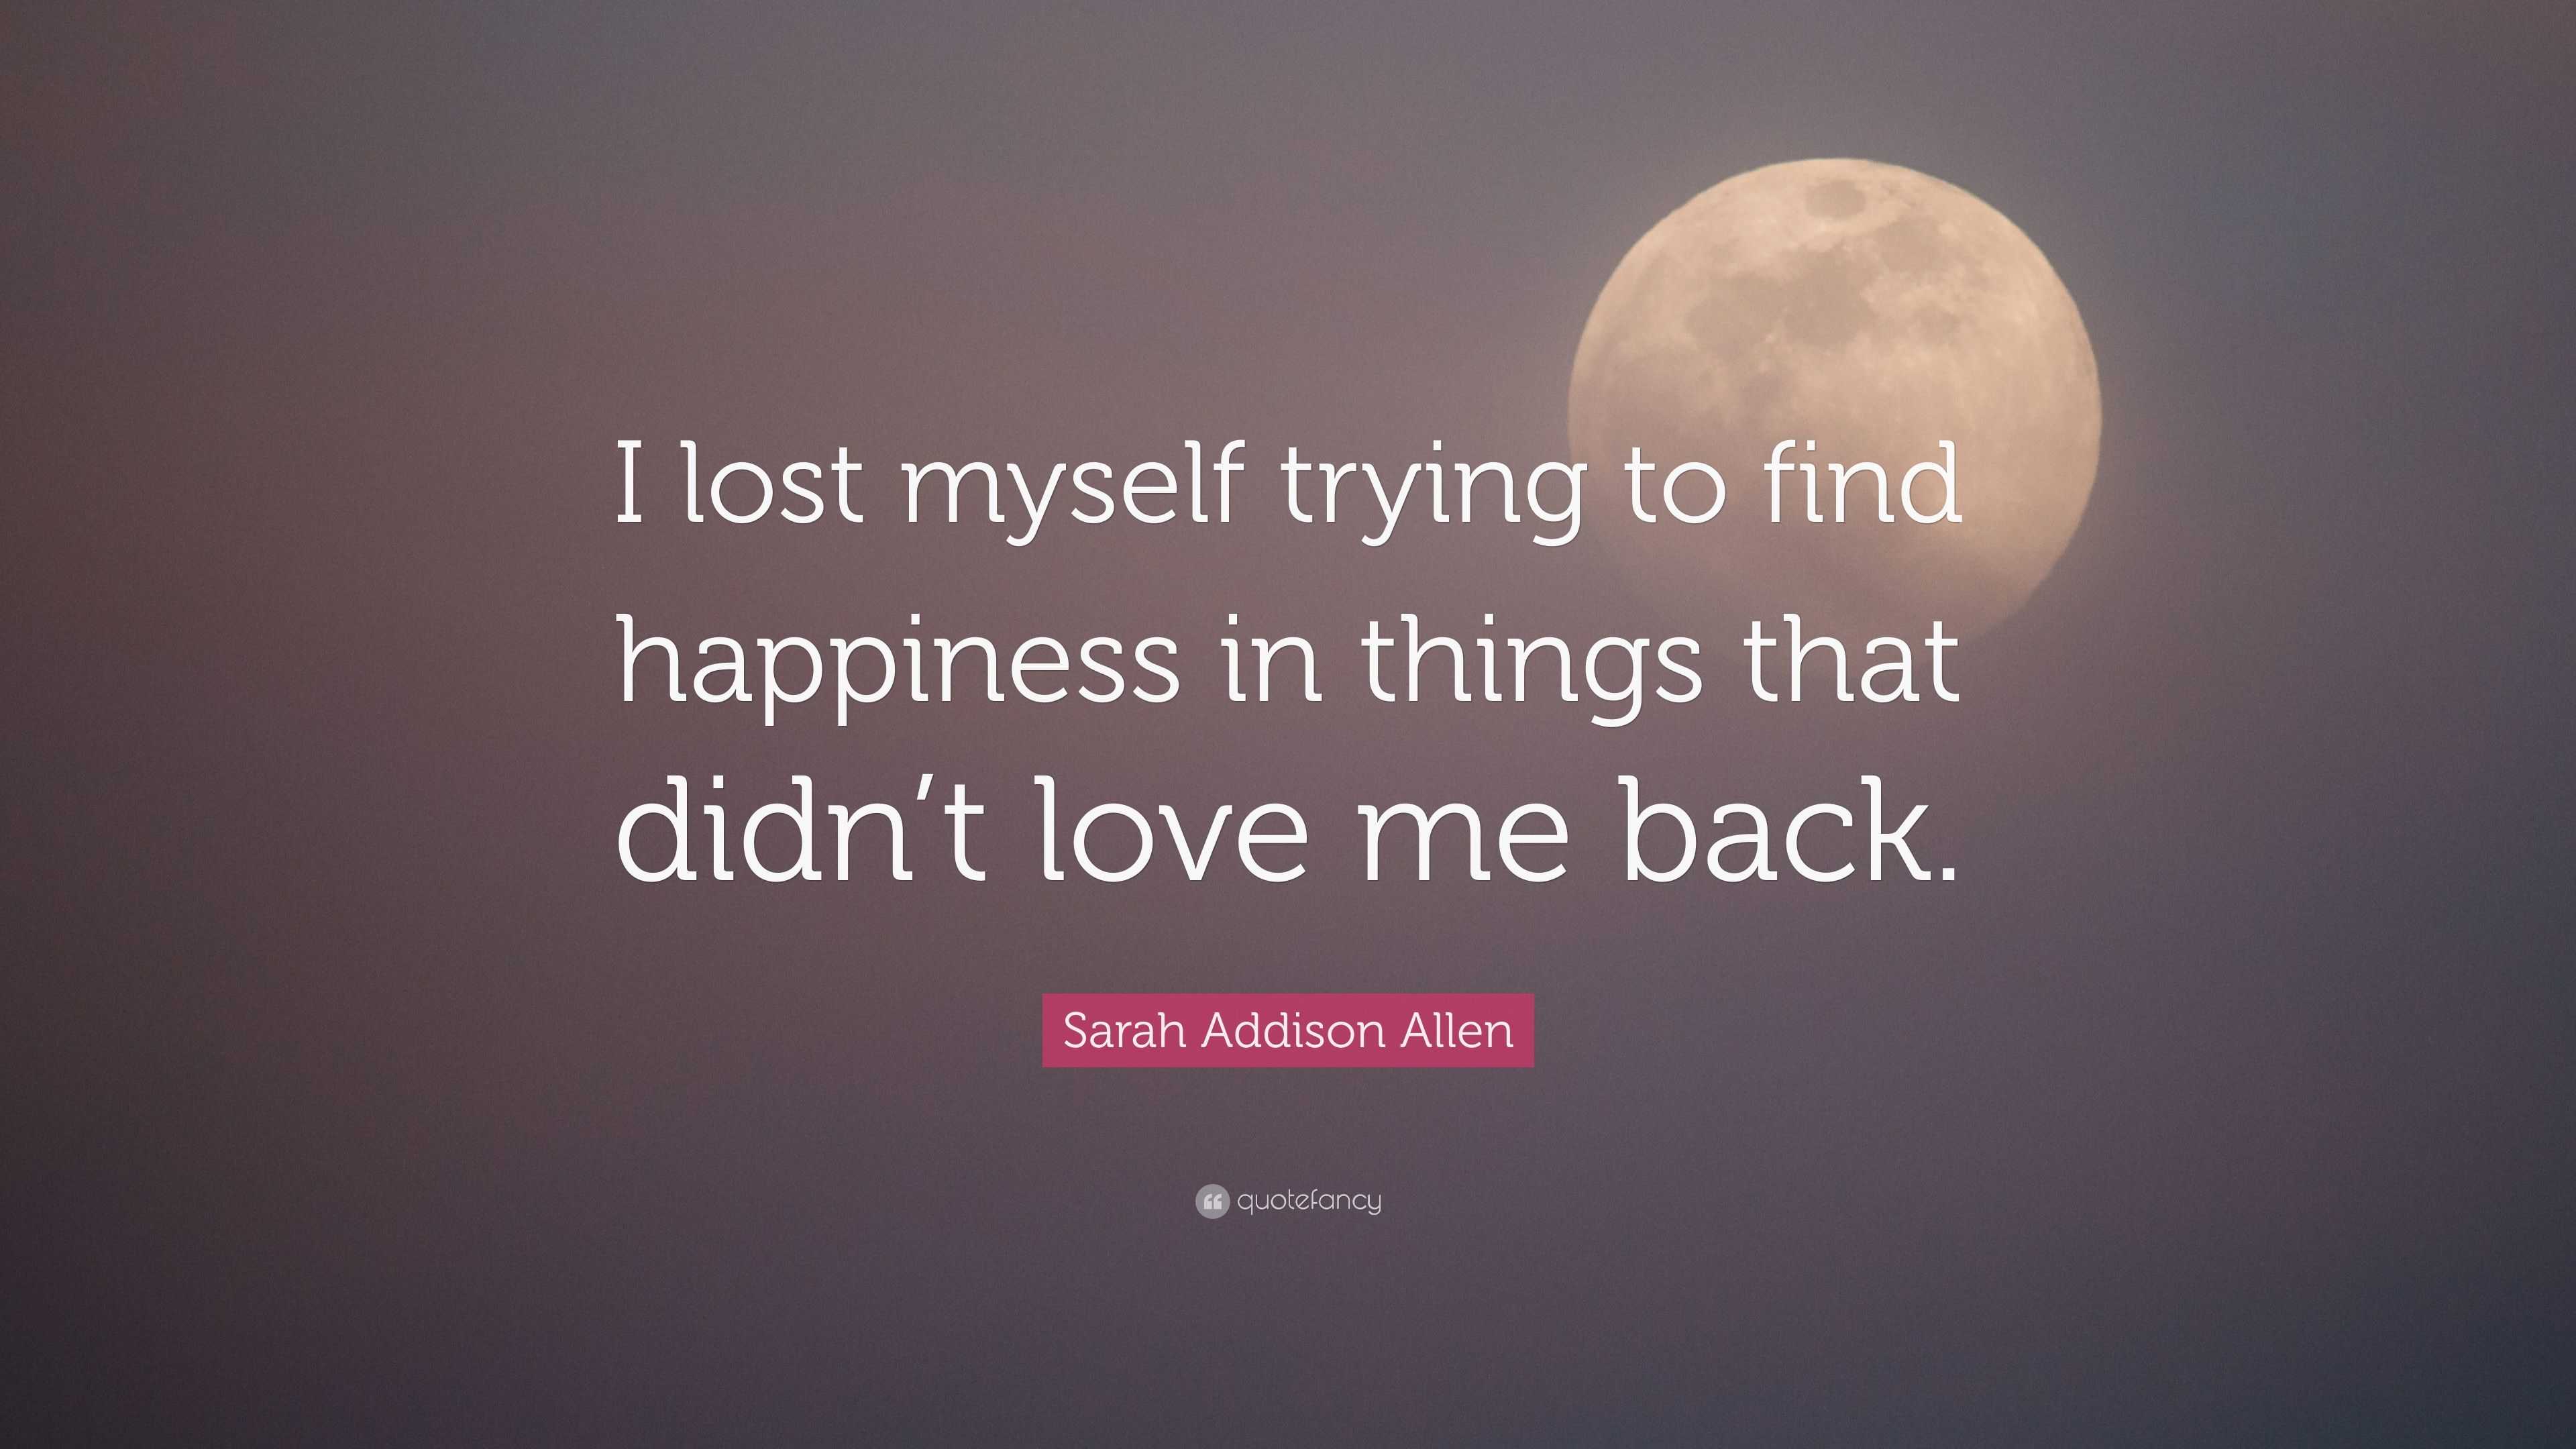 Sarah Addison Allen Quote: “I lost myself trying to find happiness in